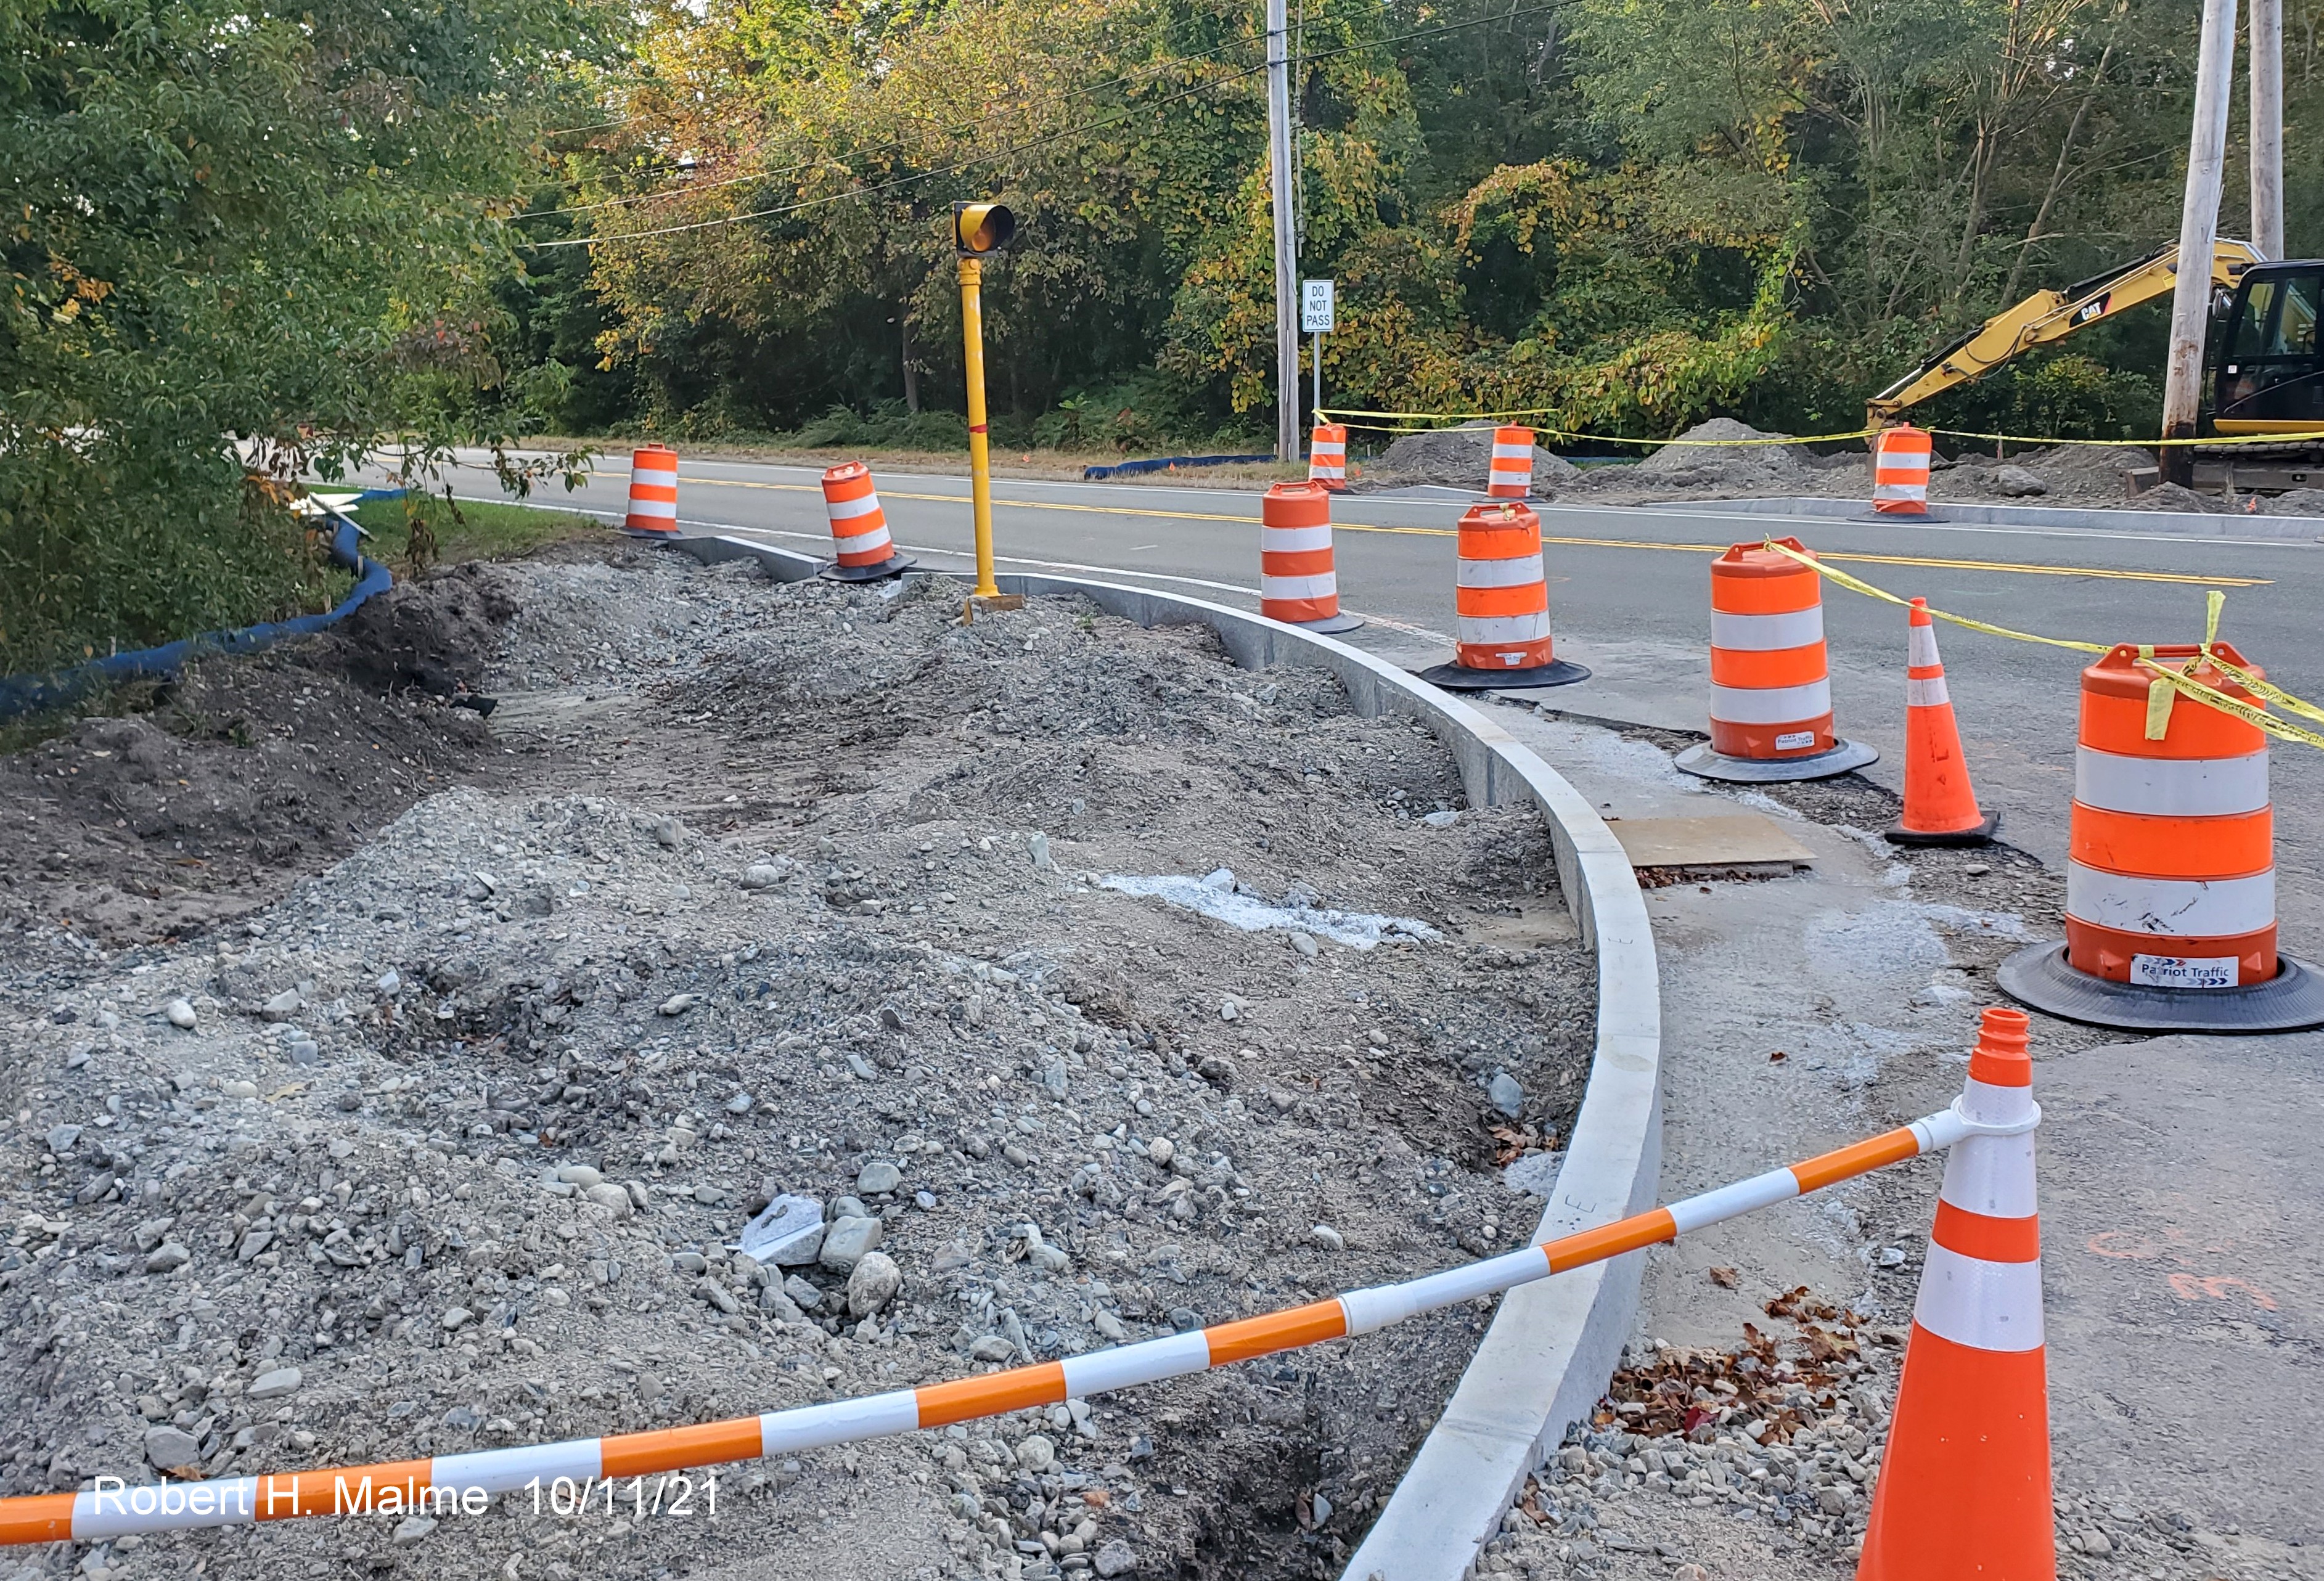 Image of initial curbing being constructed for Kilby Street/MA 3A intersection reconstruction in Hingham, October 2021